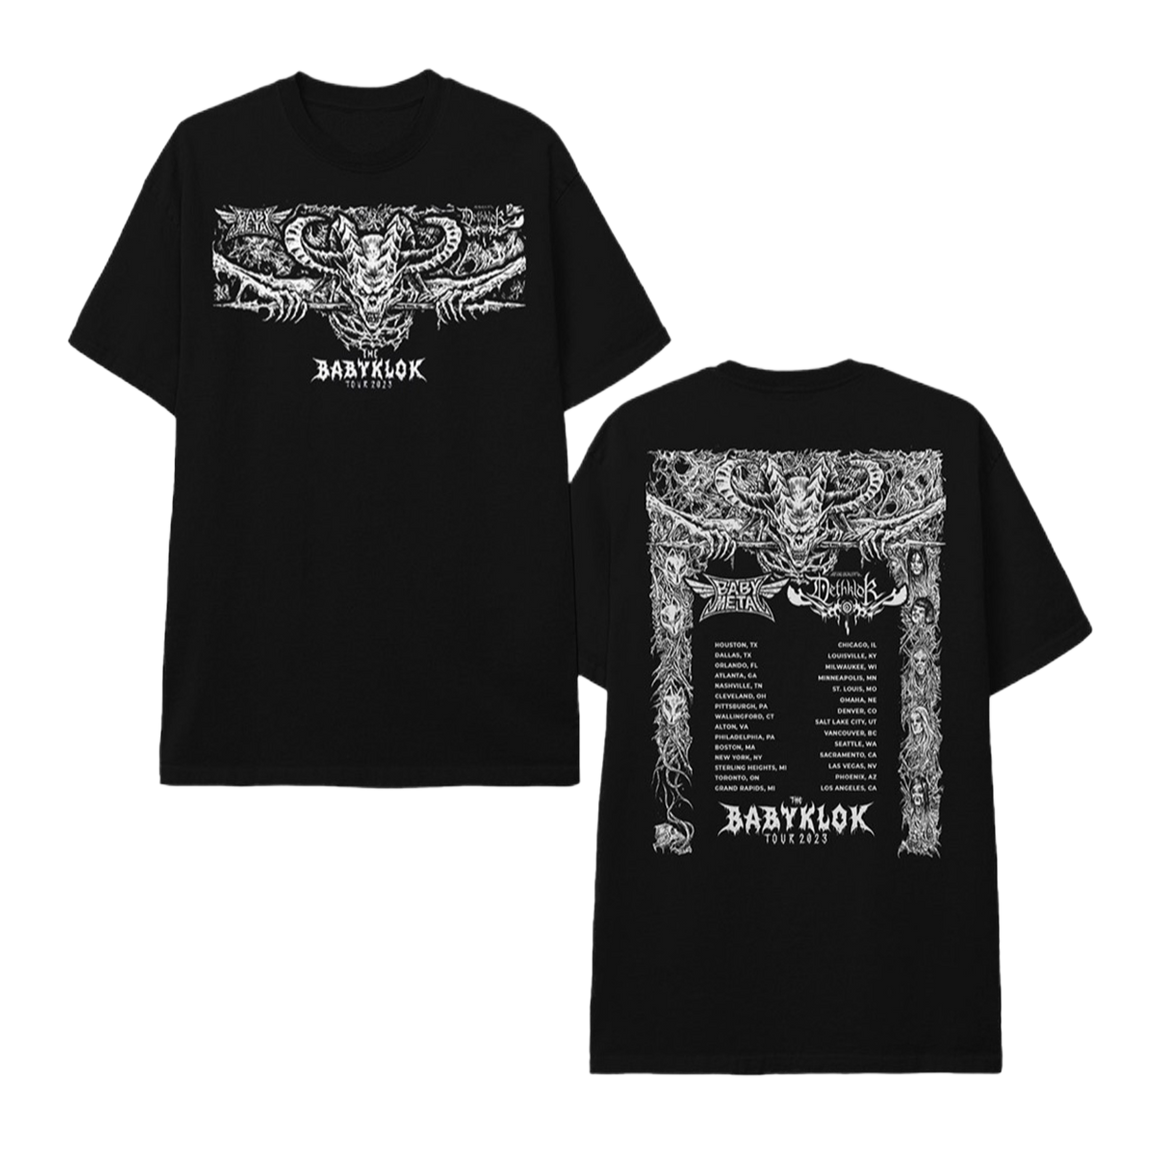 Immortal (Logo) baby tee  100% official band merchandise from Metal K